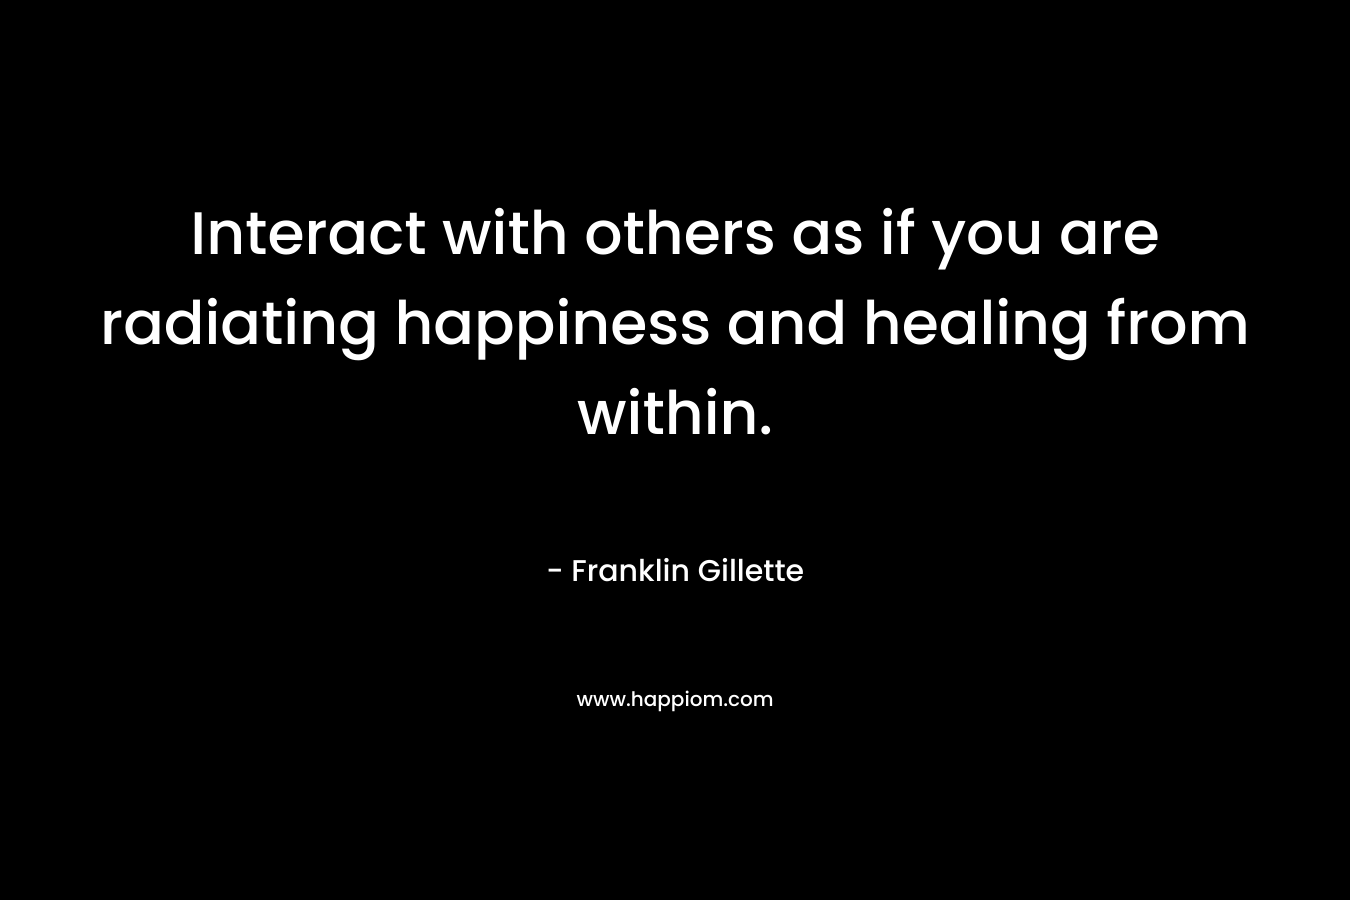 Interact with others as if you are radiating happiness and healing from within.